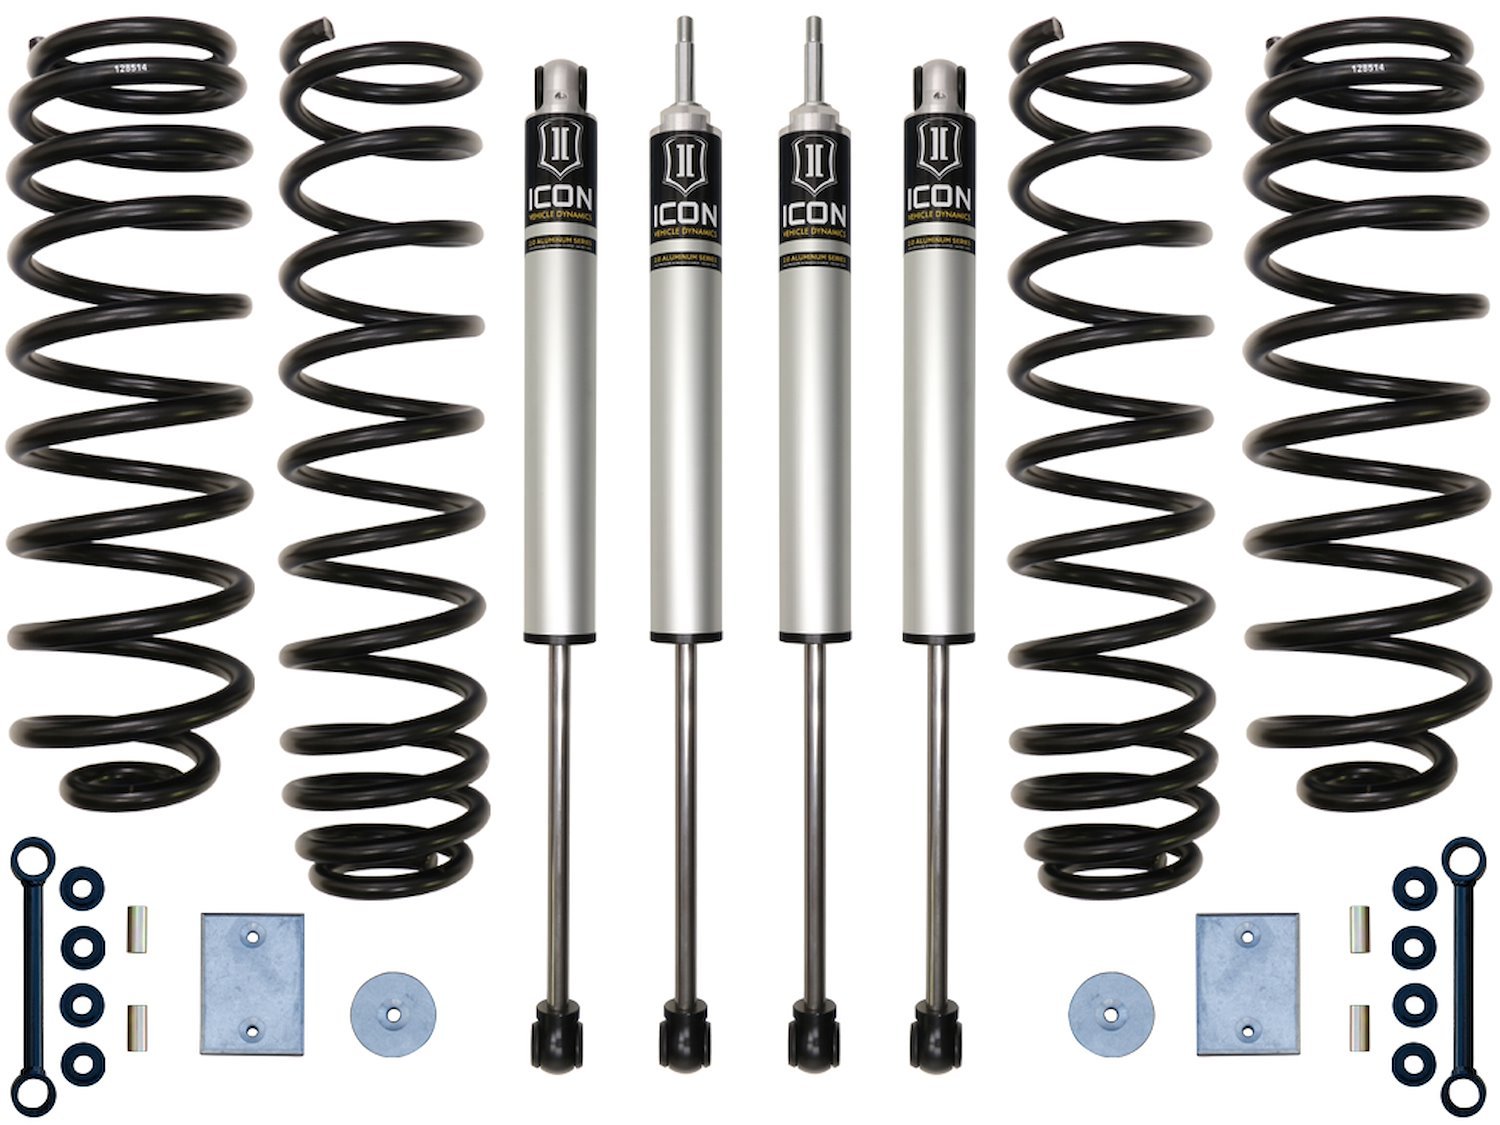 K22001 Front and Rear Suspension Lift Kit, Lift Amount: 3 in. Front/3 in. Rear